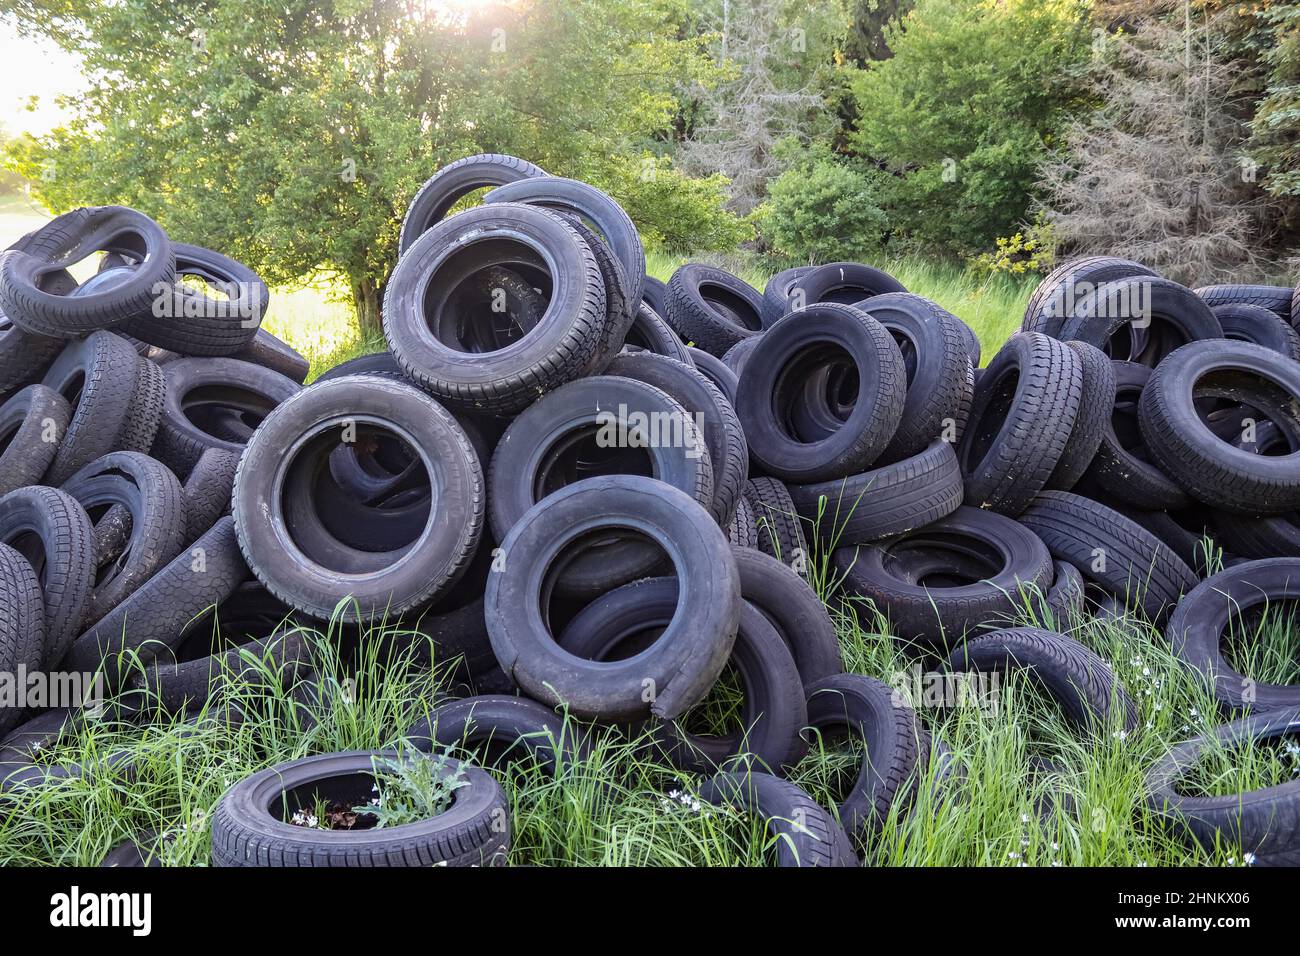 Damaged and worn old black tires on a stack. Damaged and worn old black tires on a stack. Tire tread problems. Solutions concept. Tire tread problems. Stock Photo